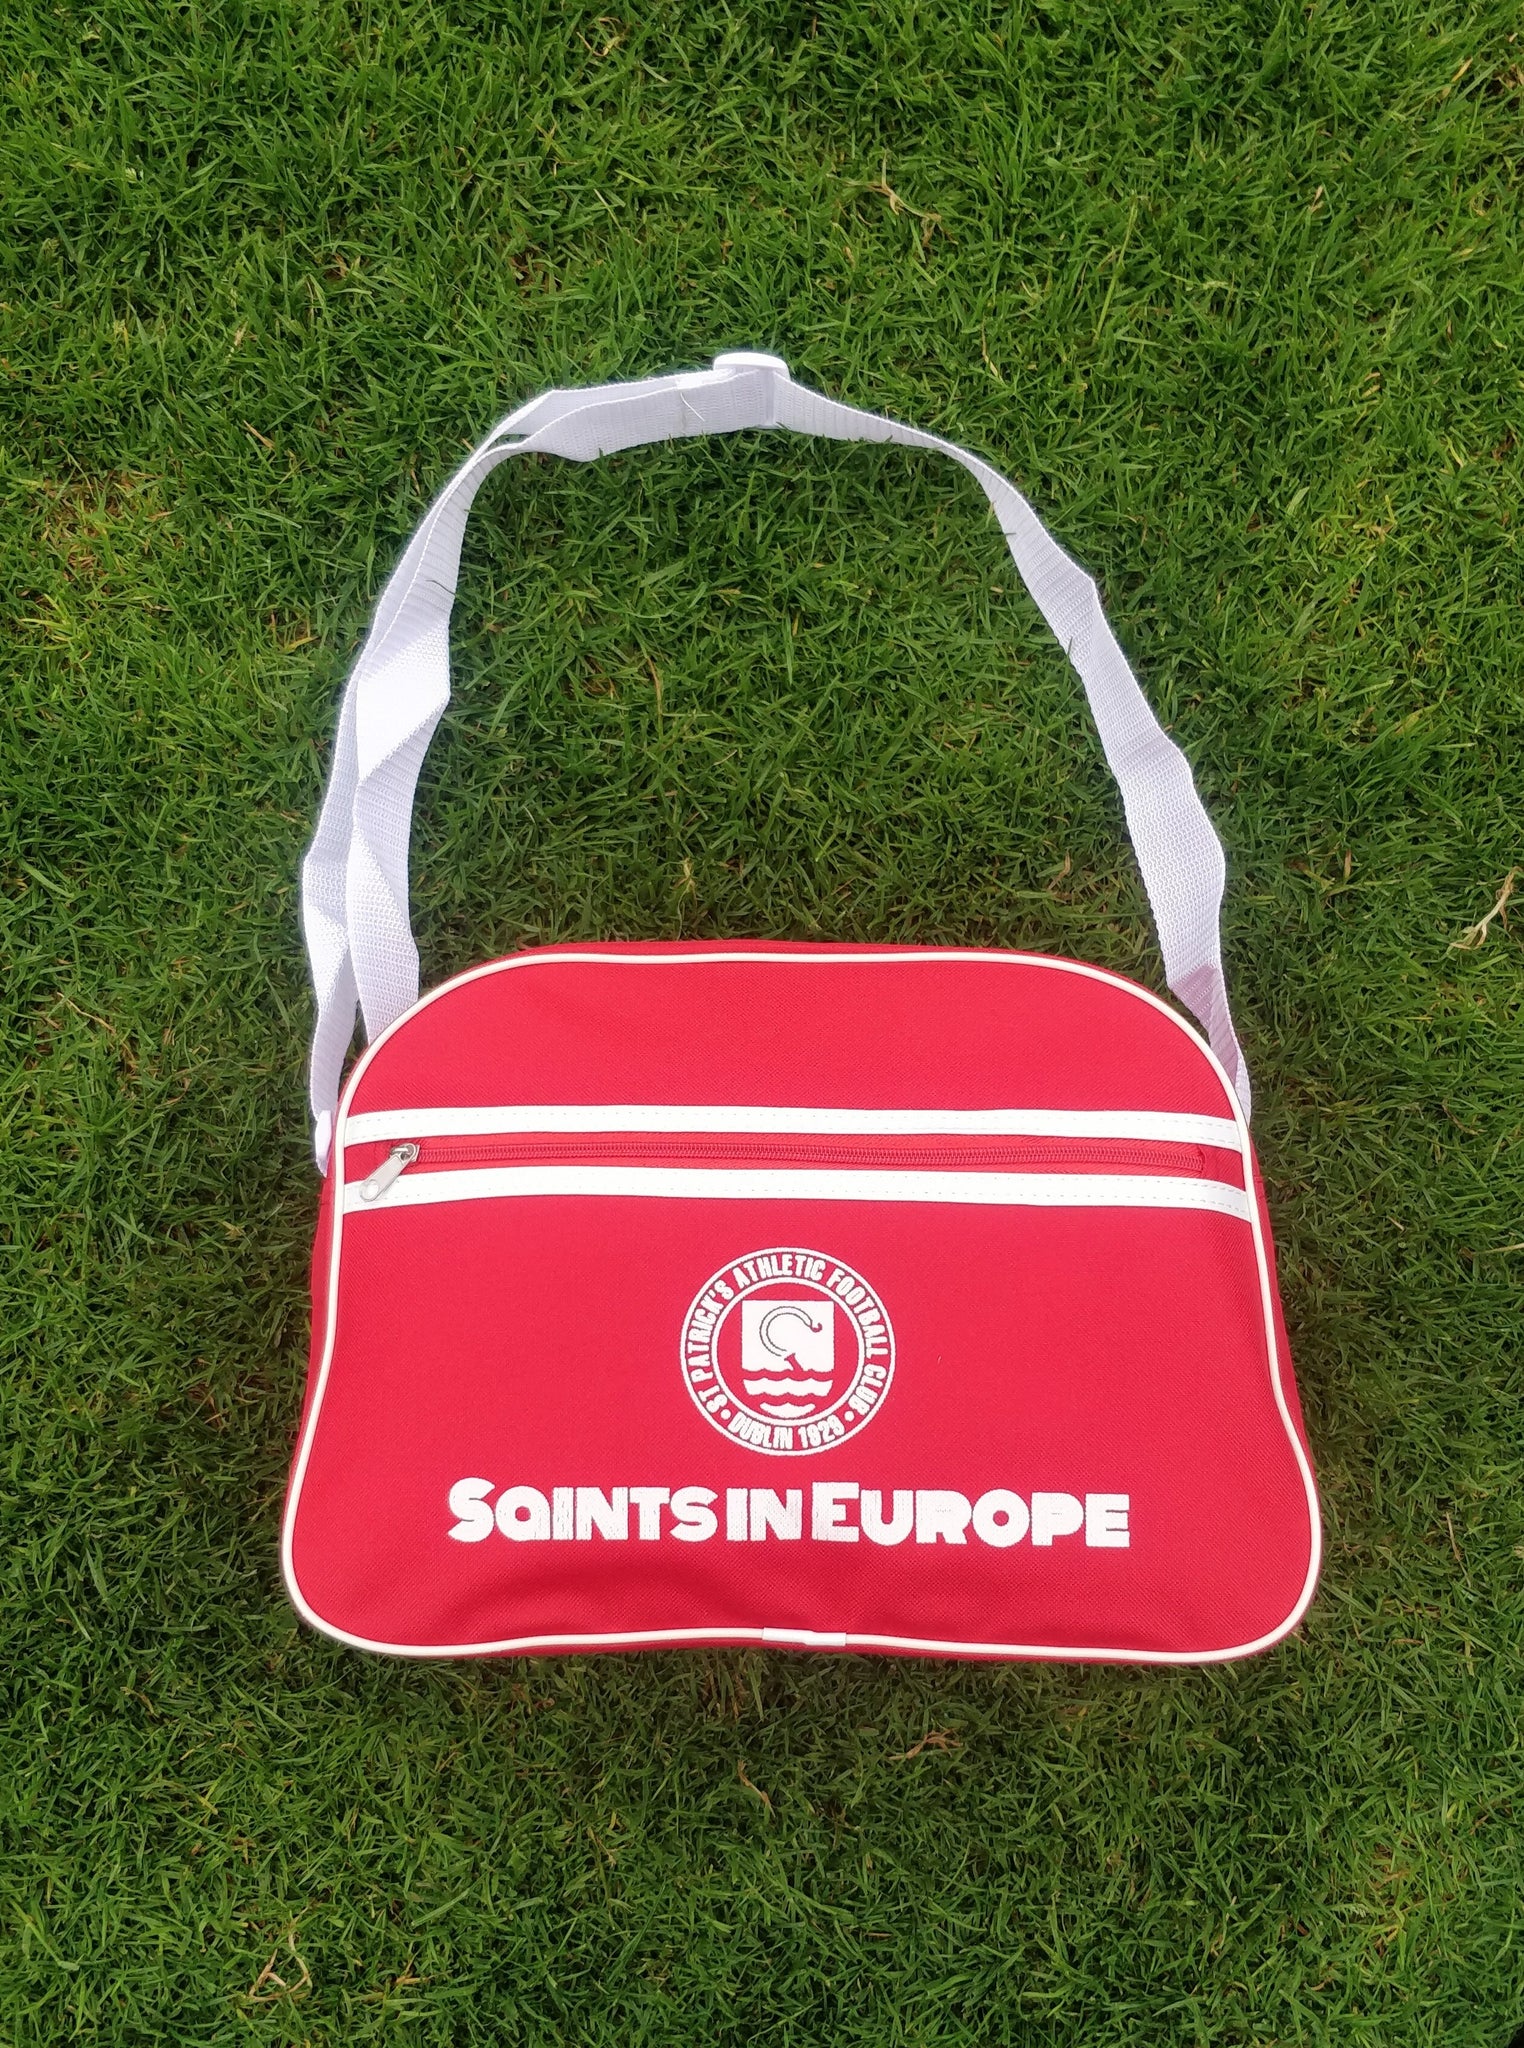 Saints in Europe Carry-On Bag